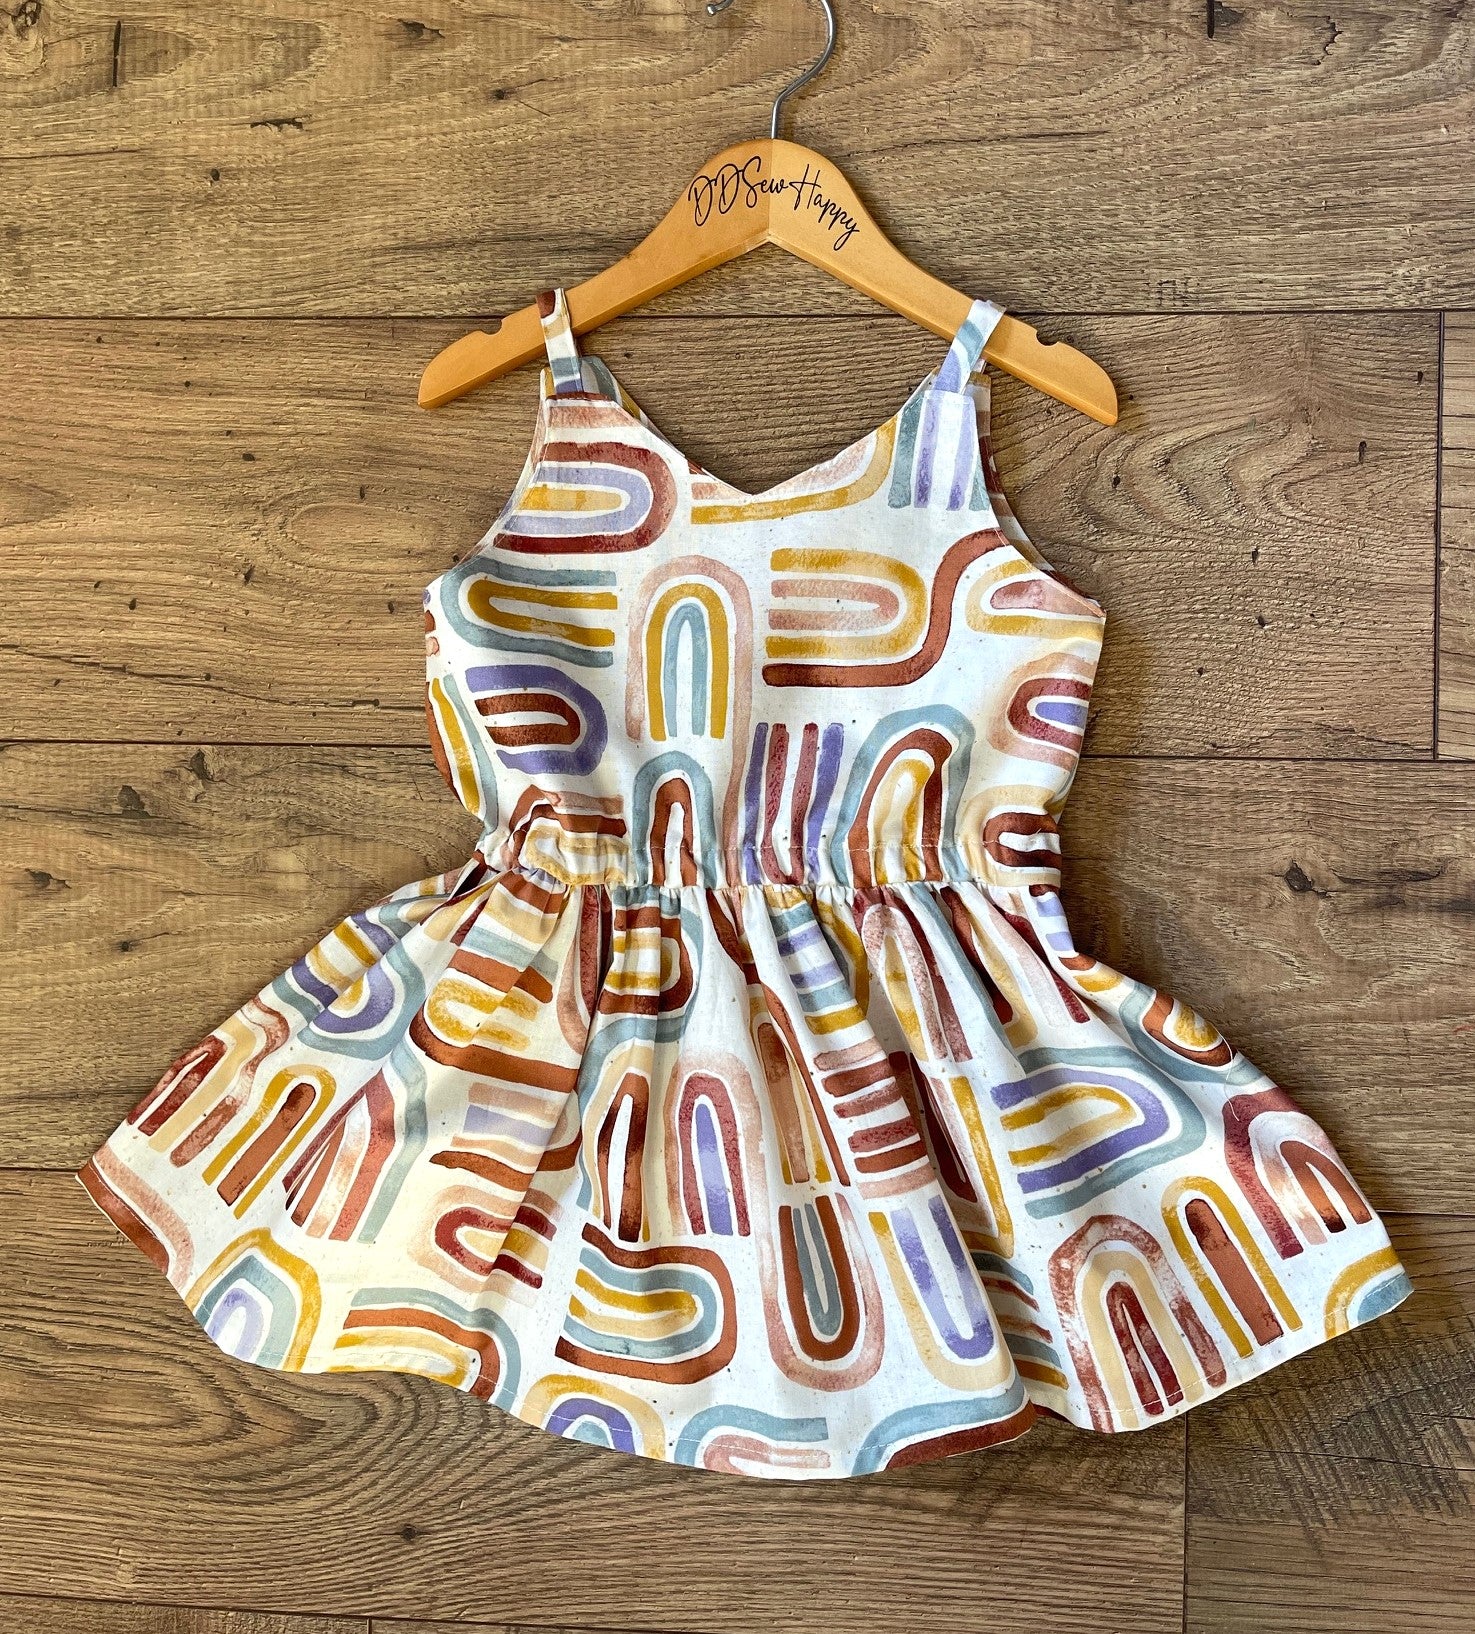 Girls and Toddlers Rainbow Natural Abstract Boho Style Dress